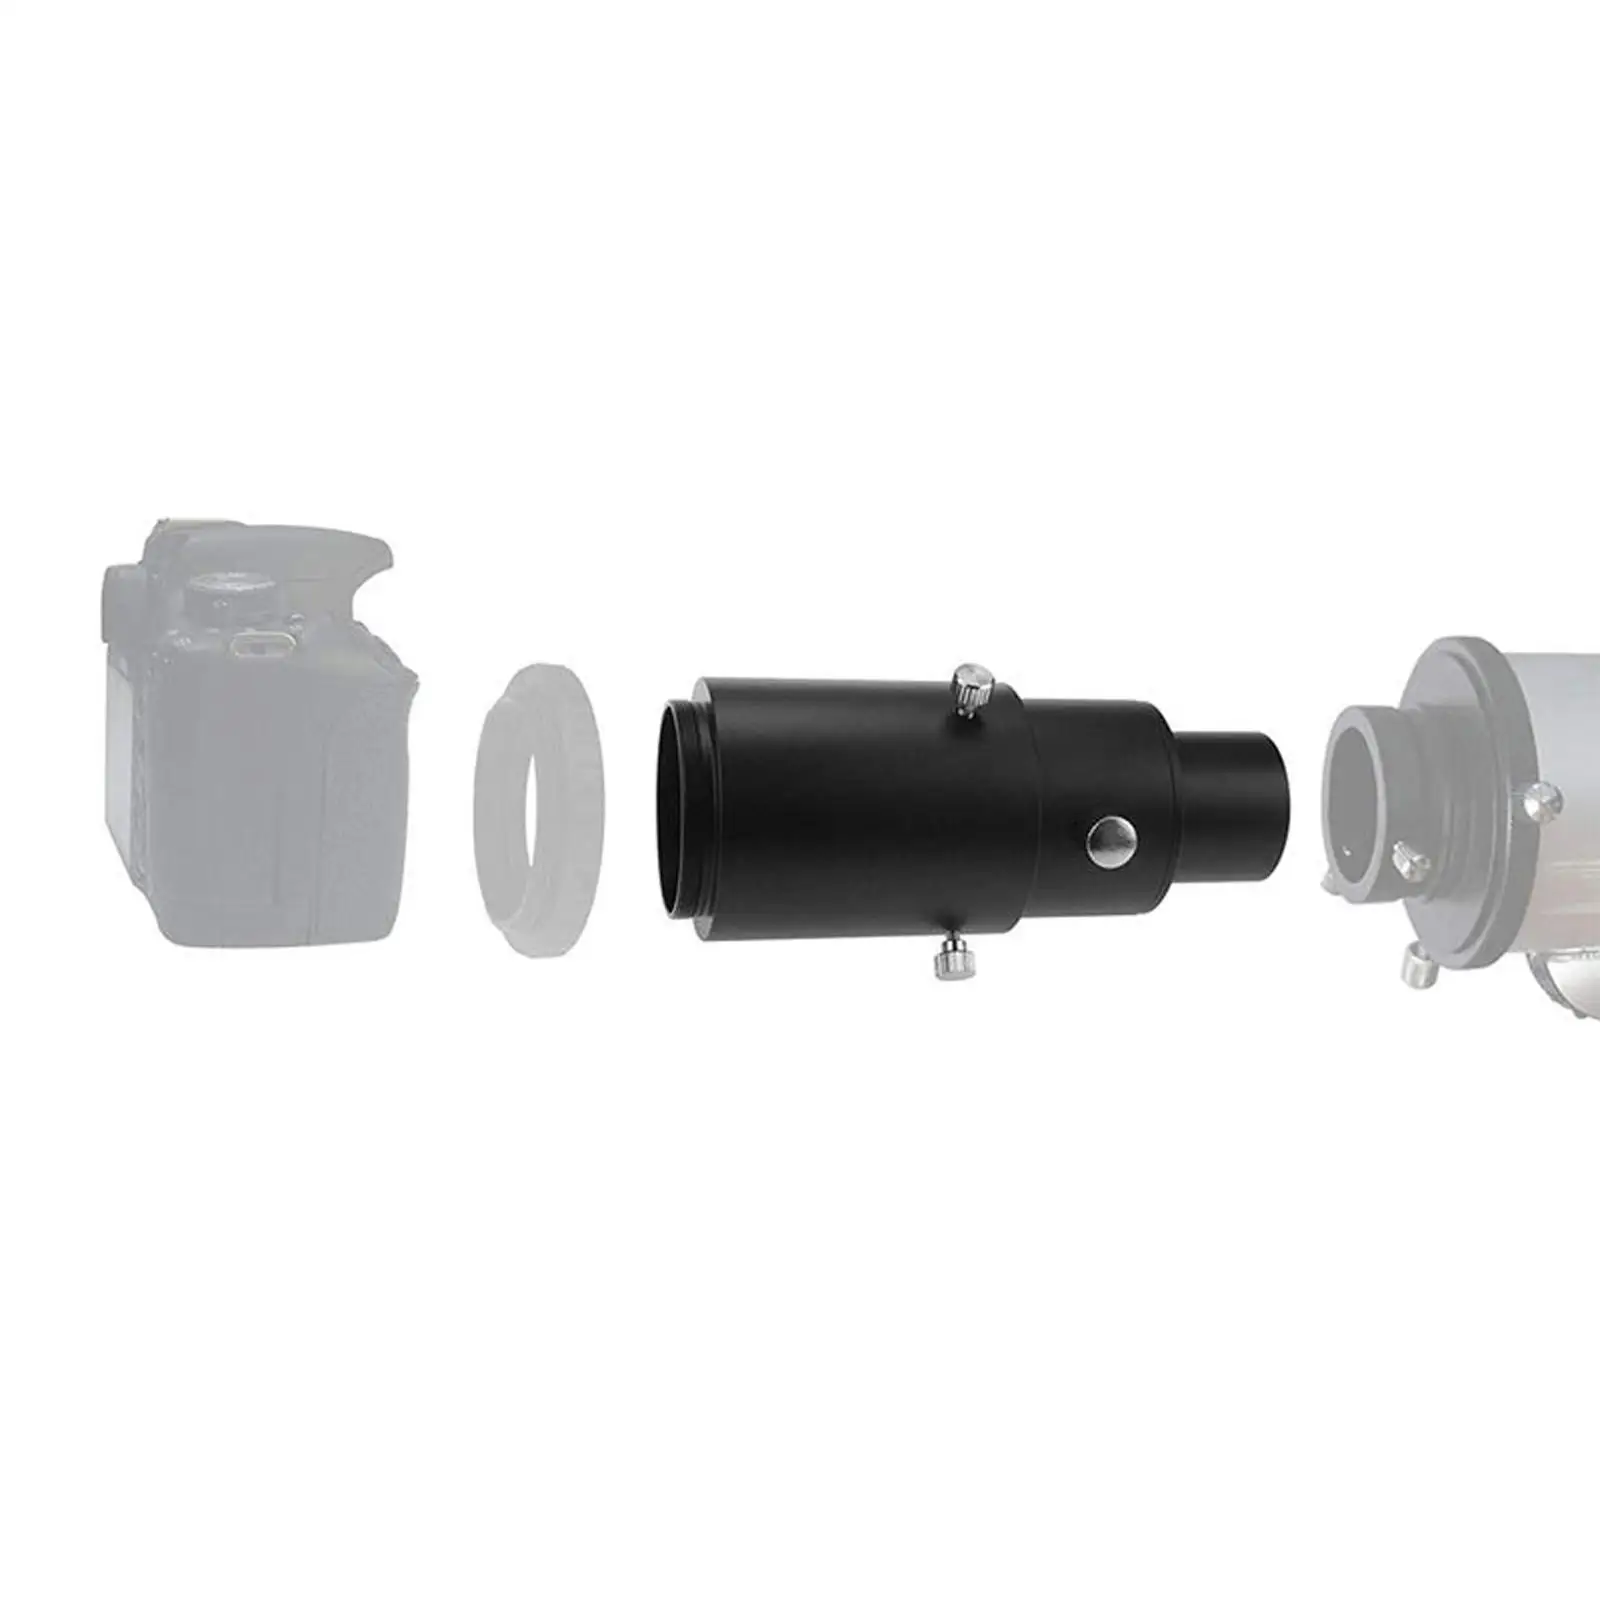 Camera Adapter Kit Extendable  Focus and Variable Eyepiece Connect Reflector Photography